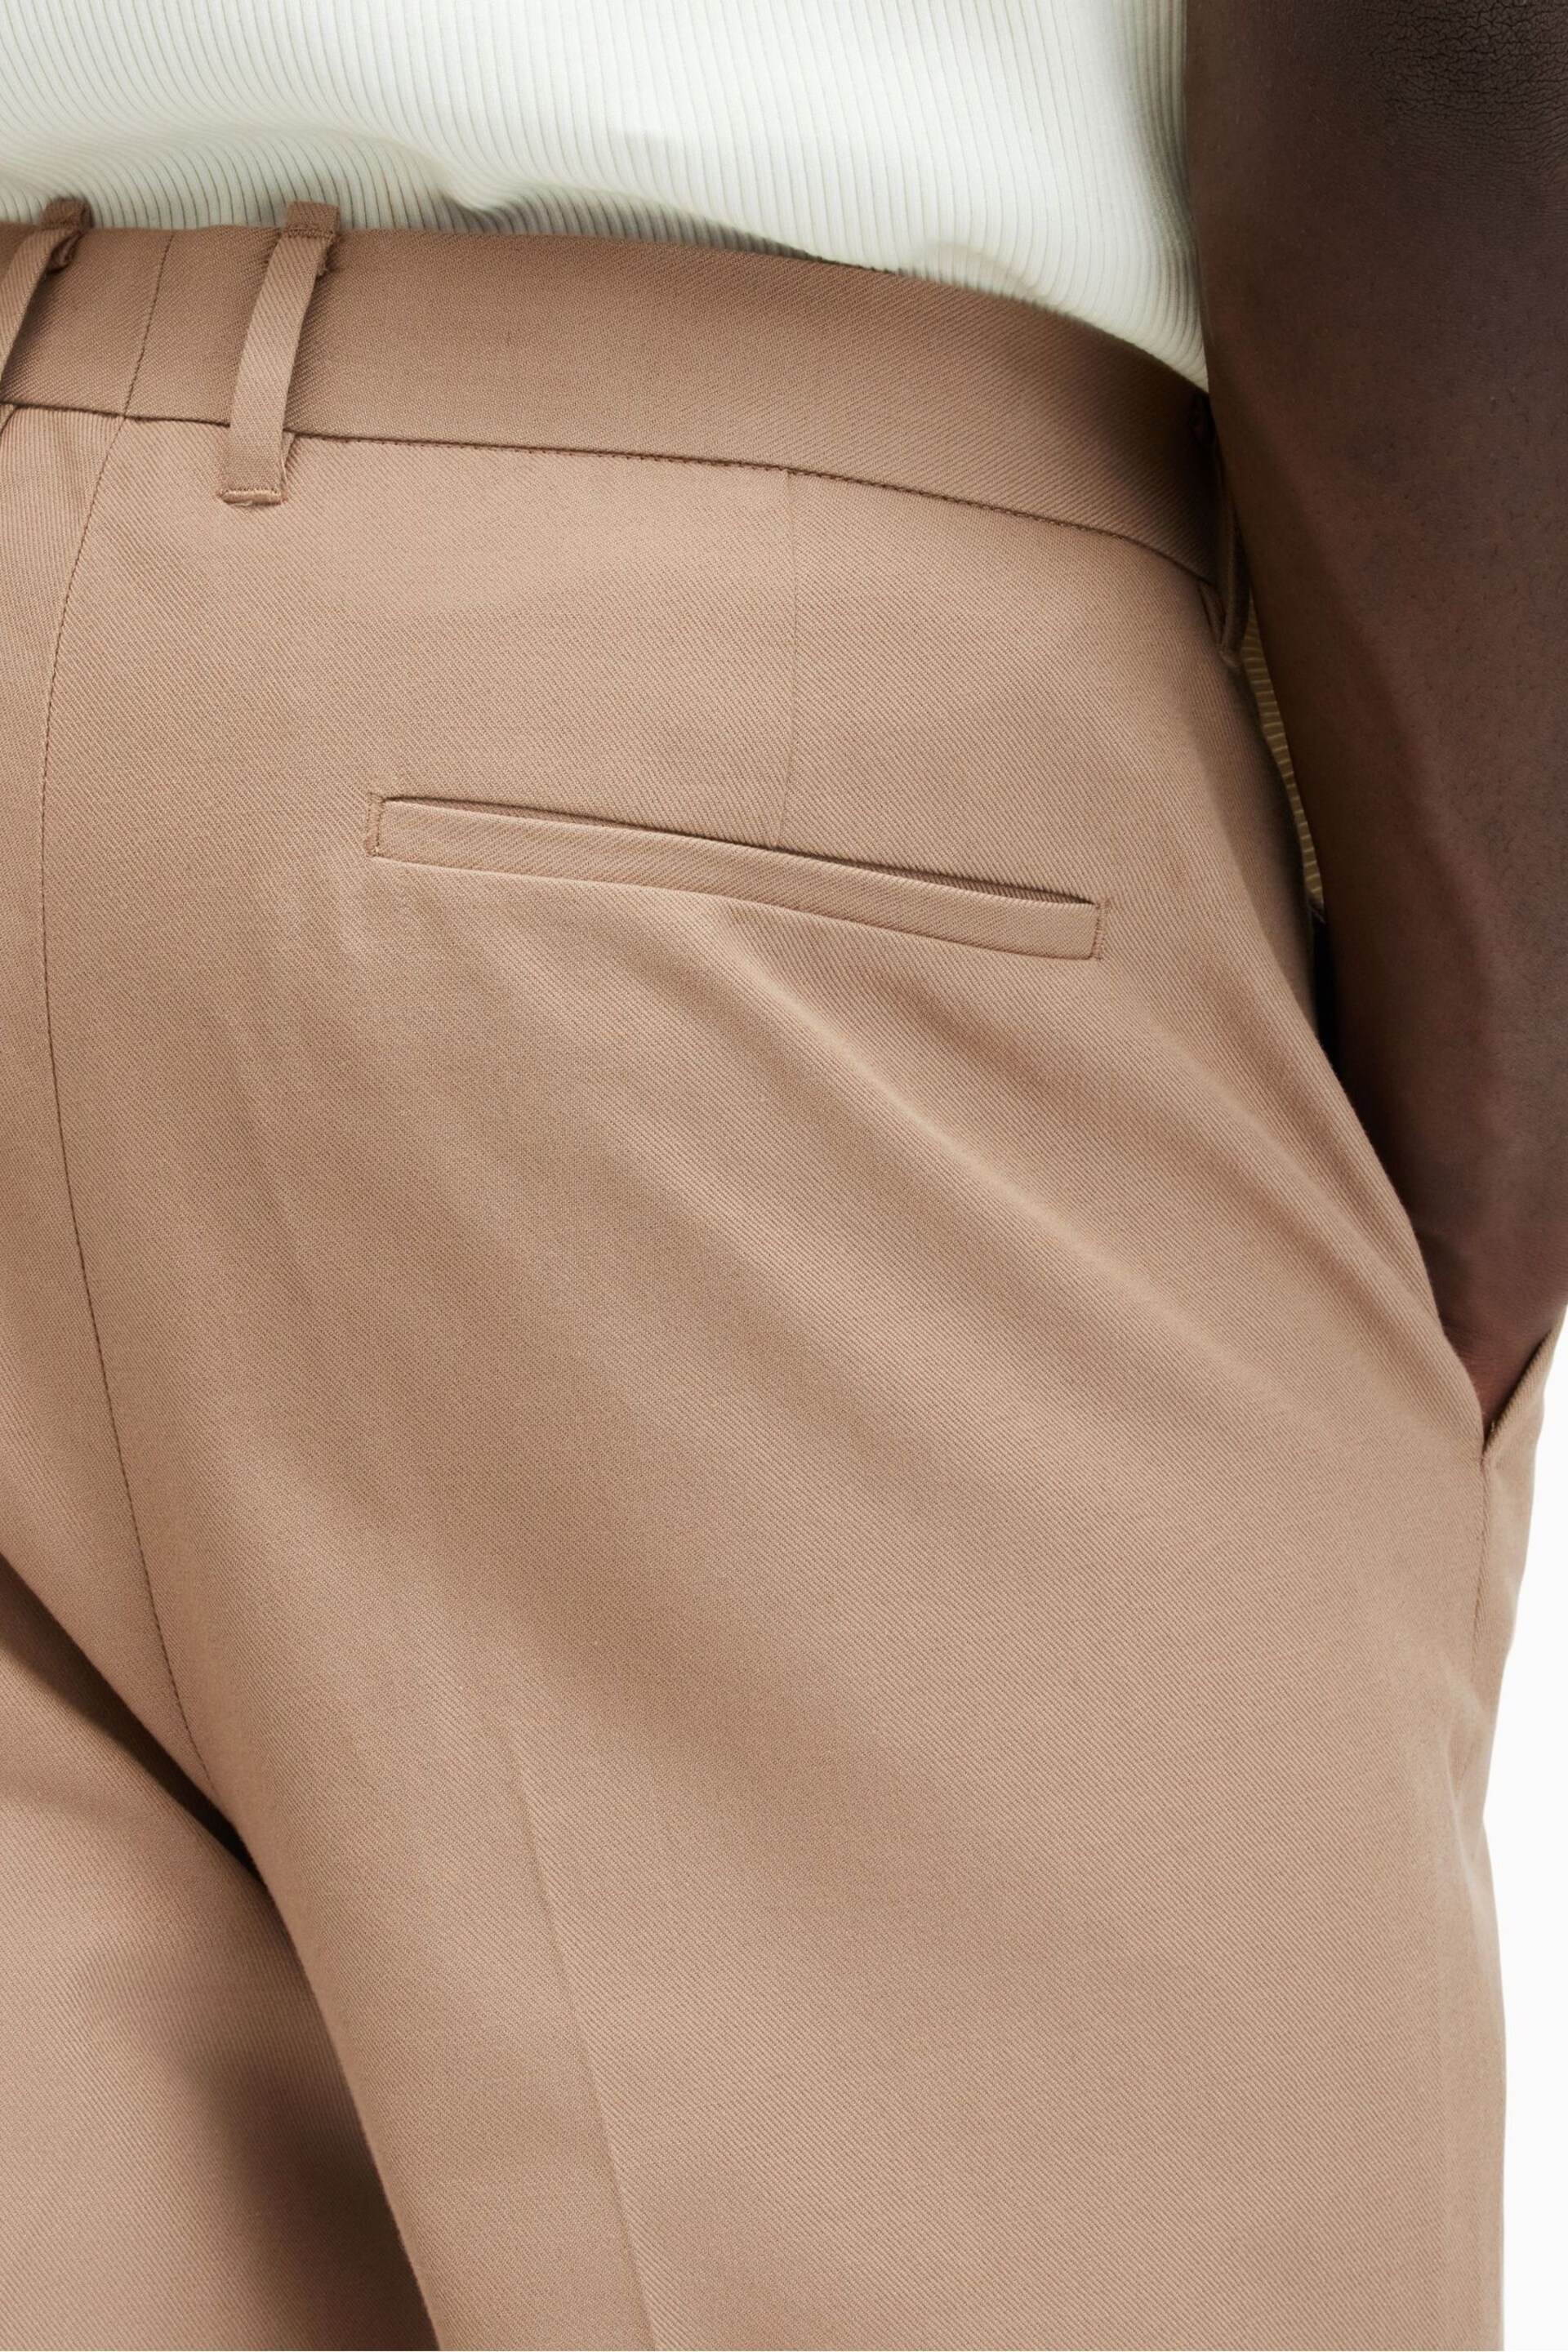 AllSaints Natural Tallis Trousers - Image 5 of 6